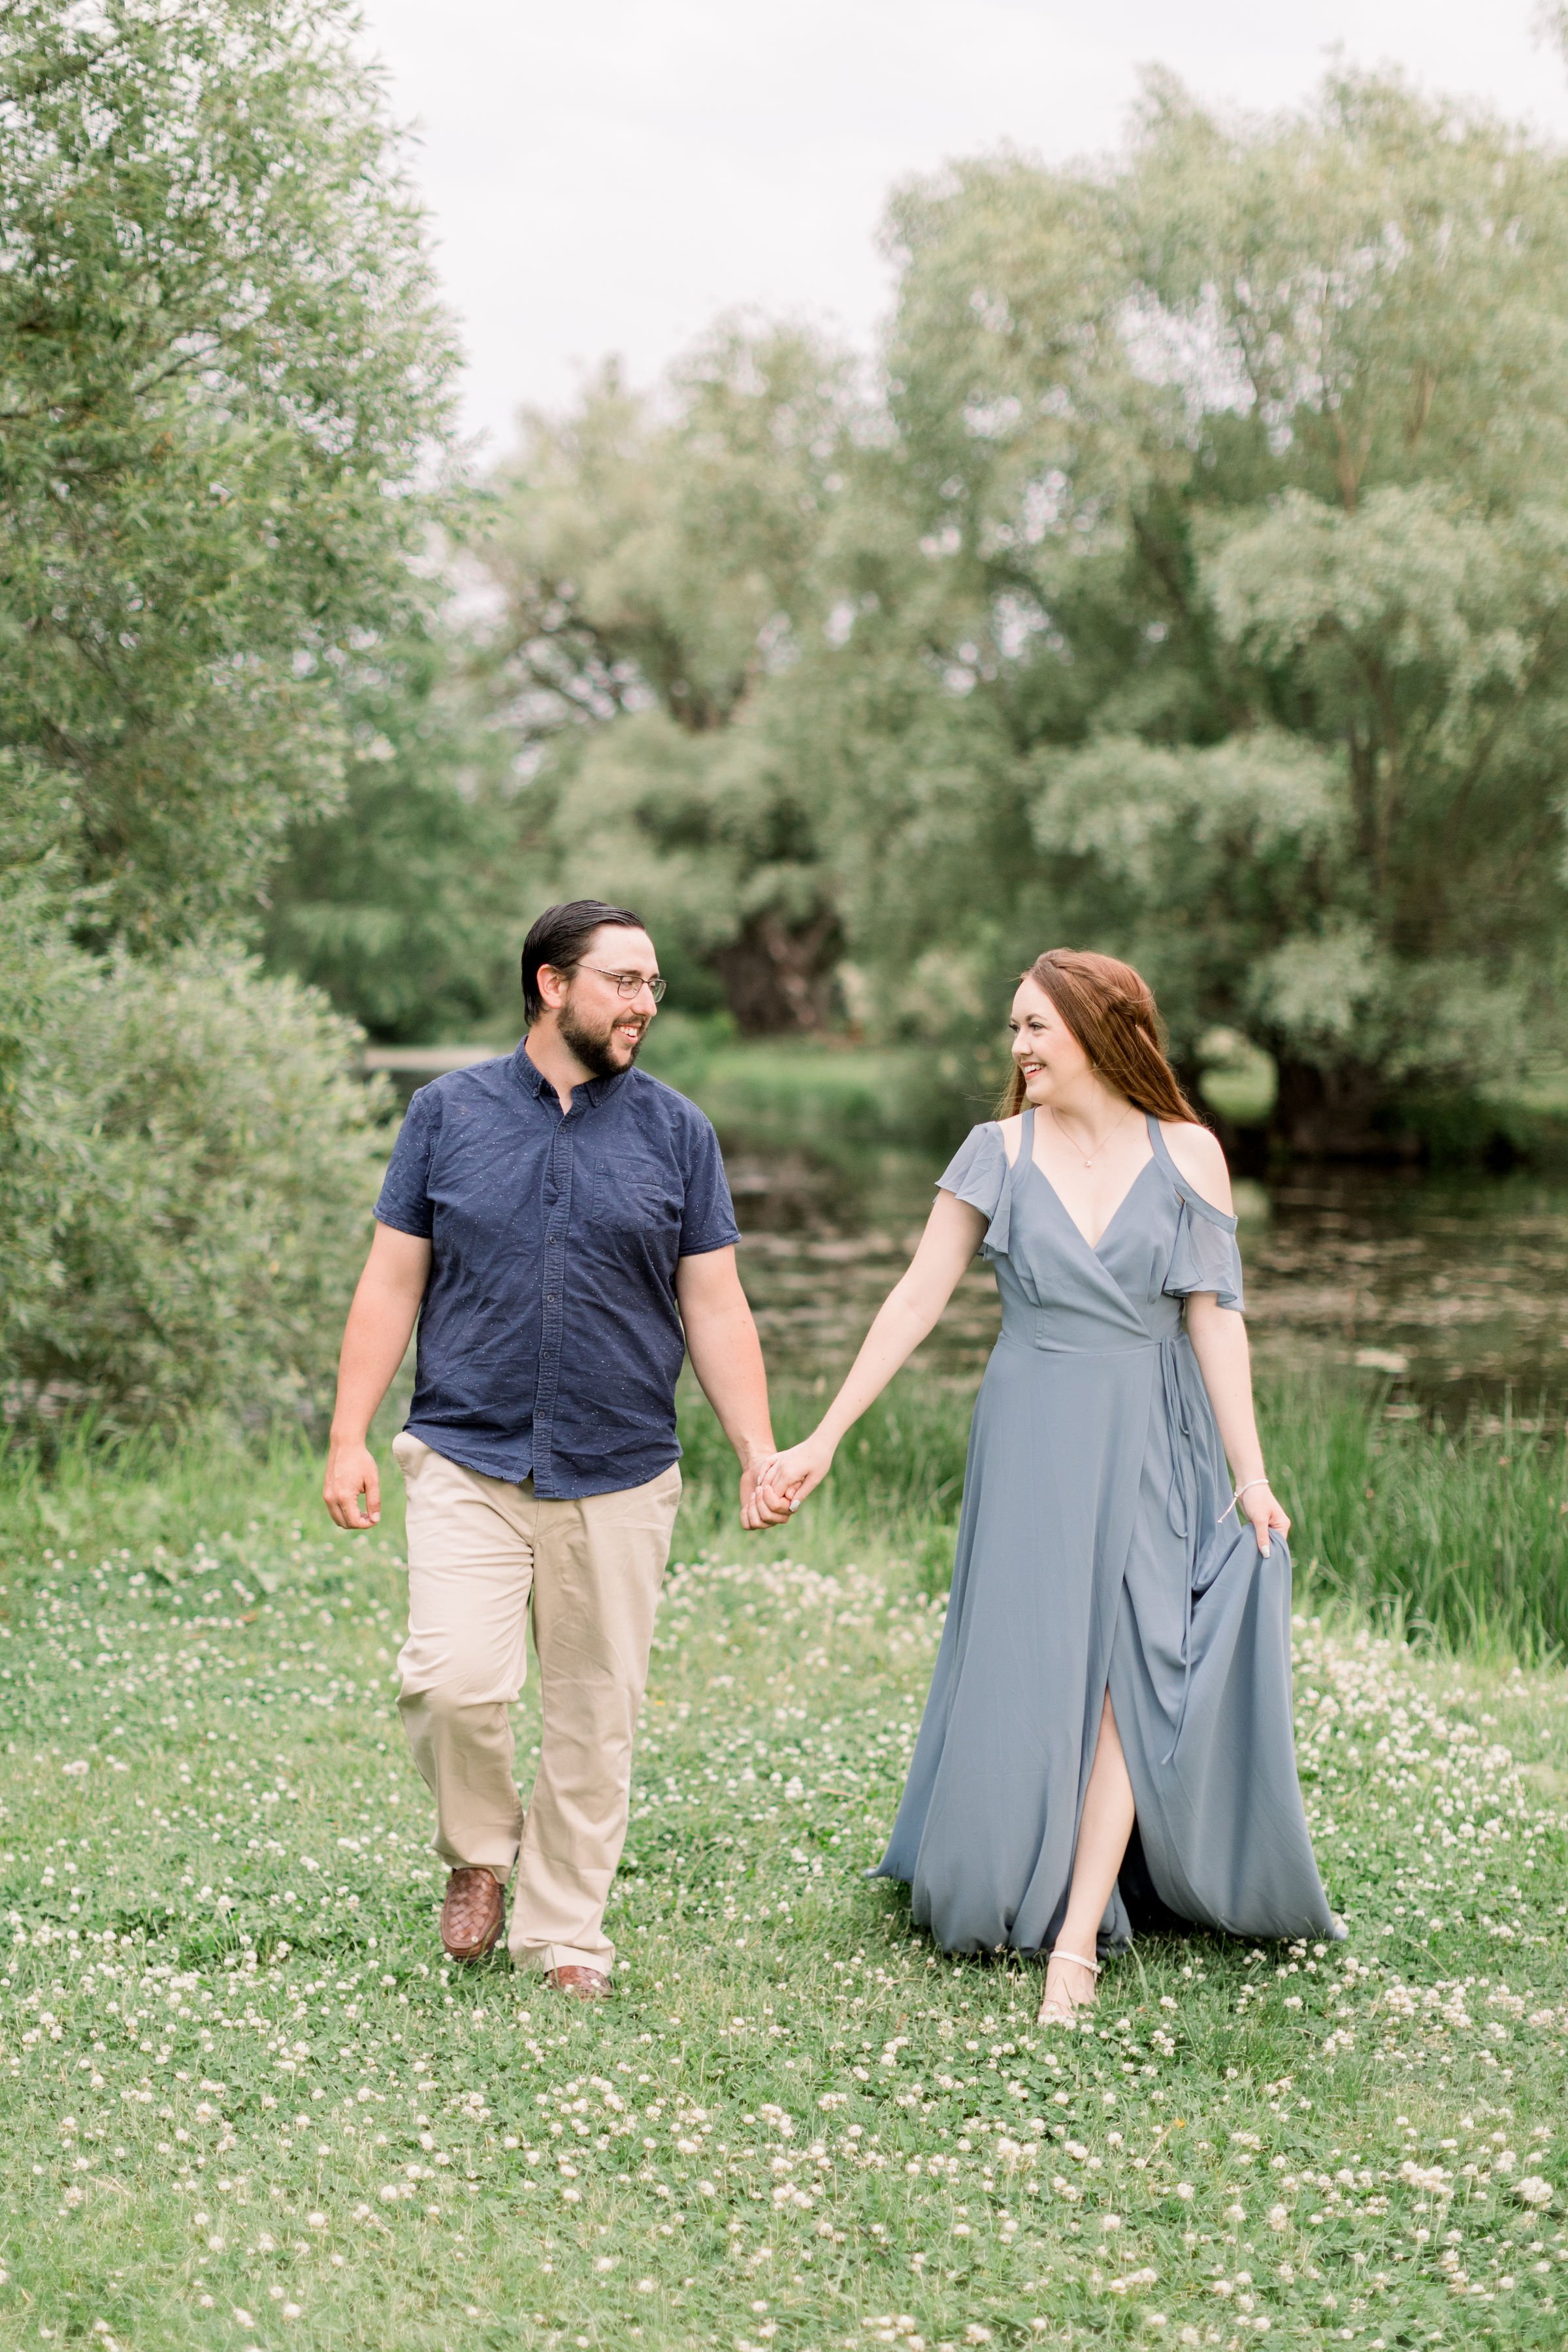  Looking lovingly at one another a newly engaged couple holds hands next to a swamp with Chelsea Mason Photography. swamp location engagements #chelseamasonphotography #chelseamasonengagements #Ottawaengagements #DominonArboretum #Ottawaphotographers